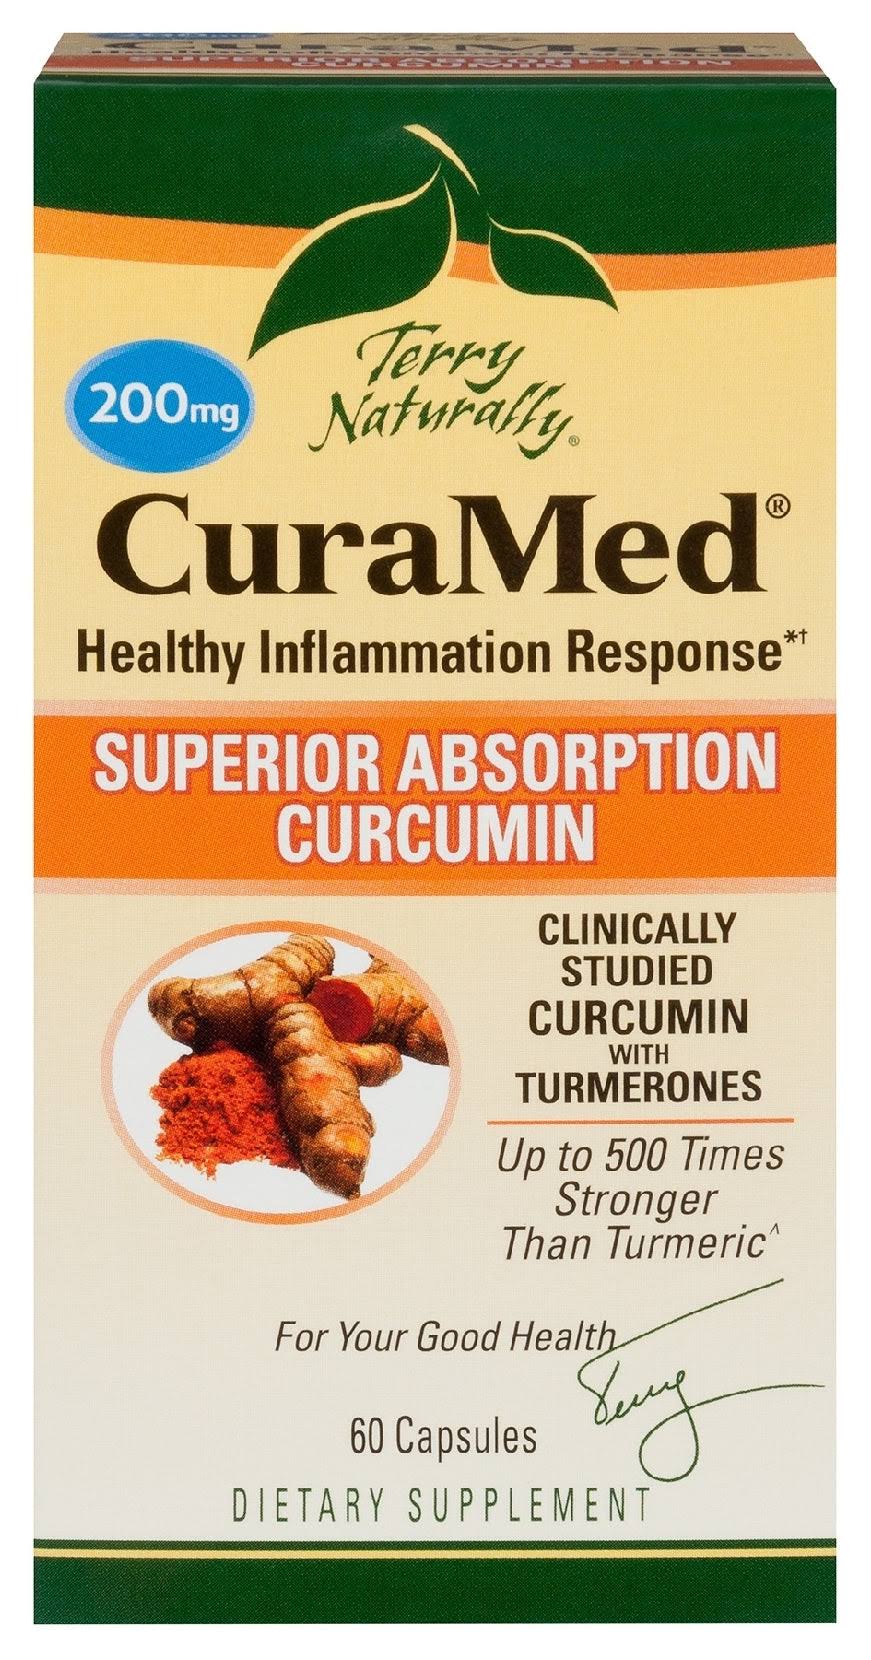 Terry Naturally CuraMed Healthy Inflammation Response